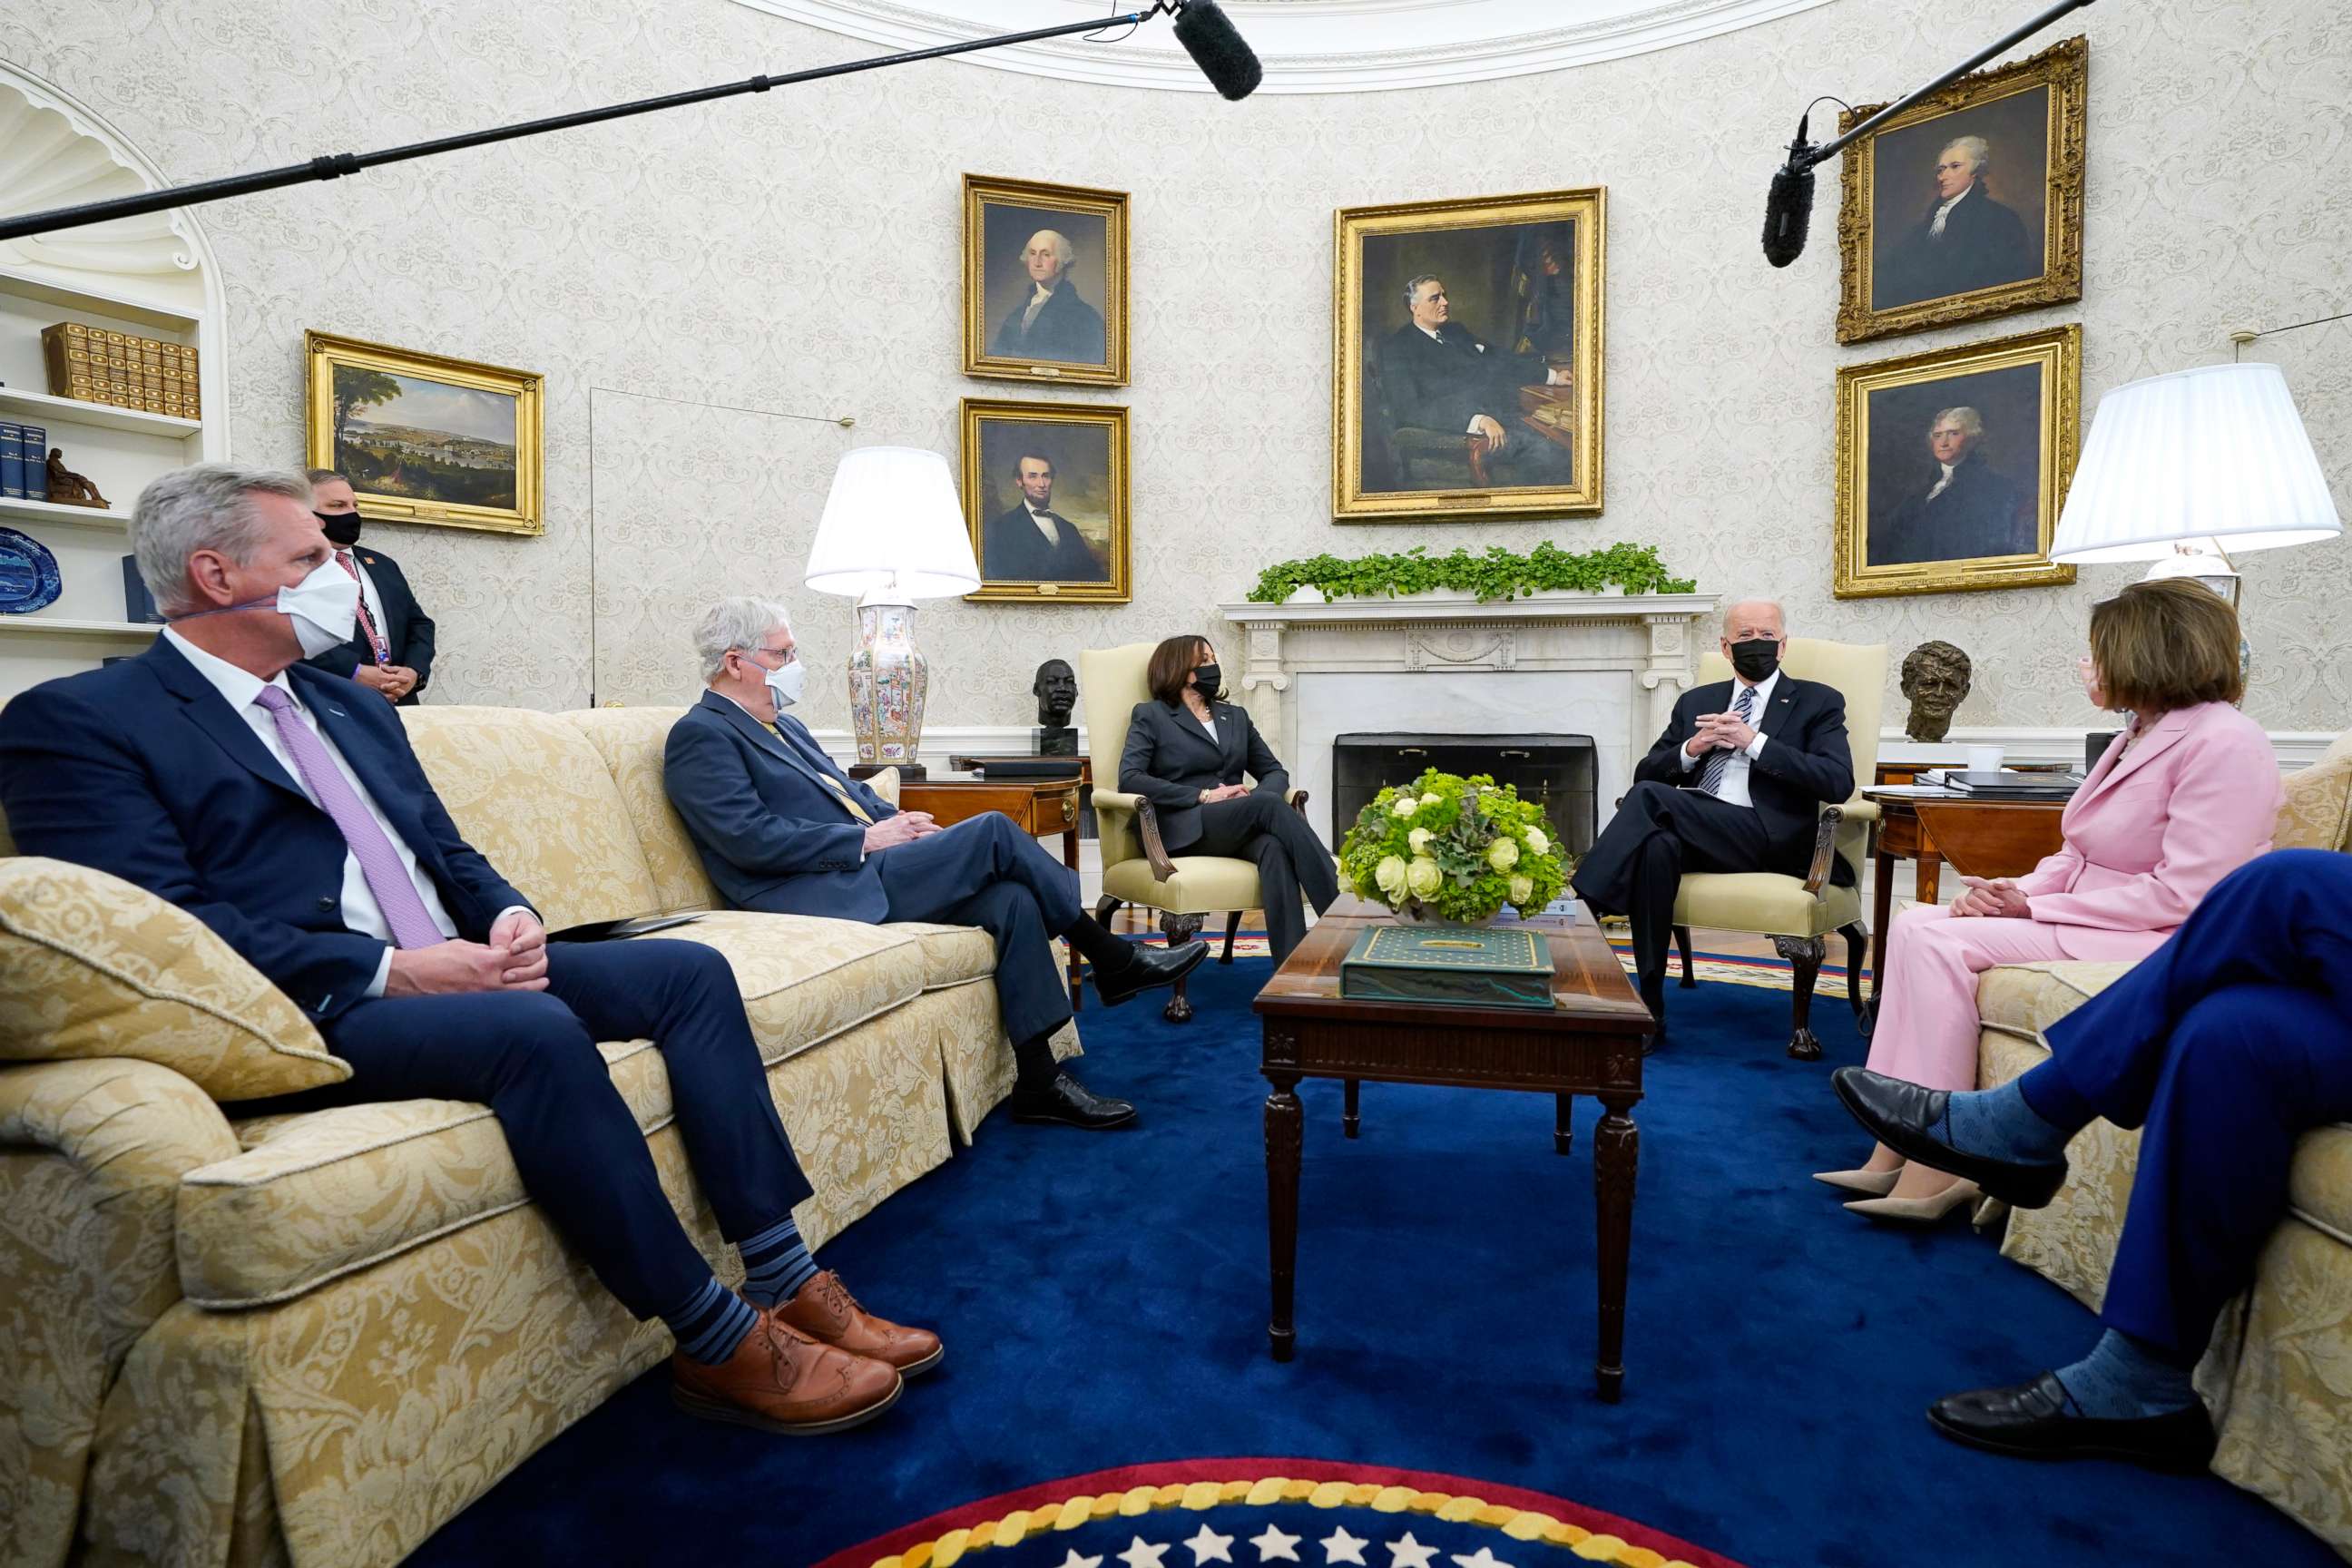 PHOTO: President Joe Biden speaks during a meeting with congressional leaders in the Oval Office of the White House, May 12, 2021, in Washington.